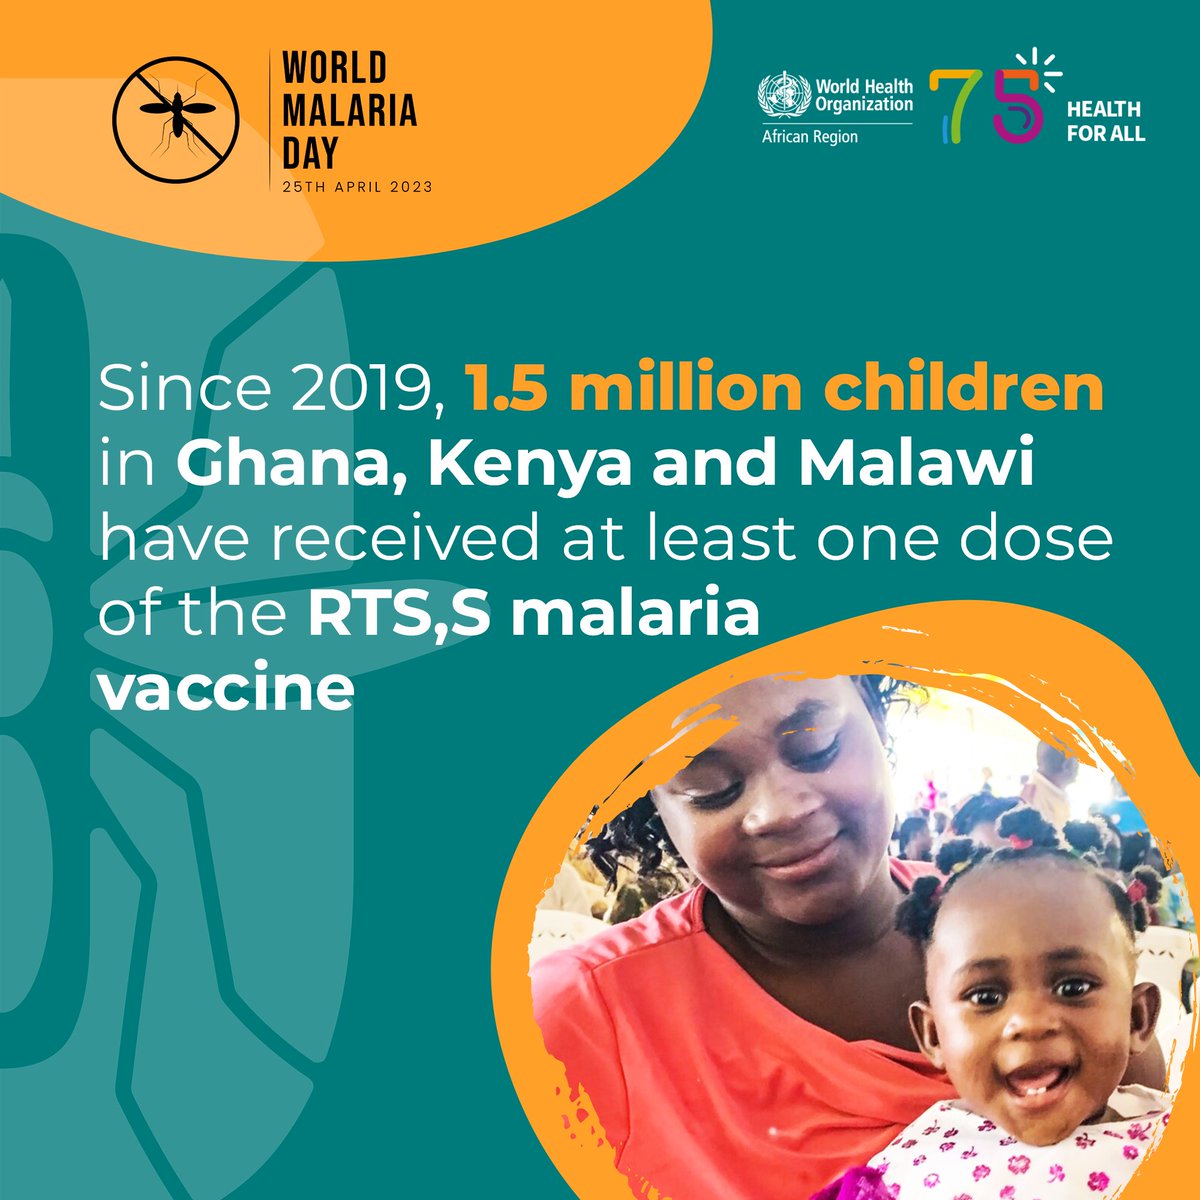 In 2020, 1 child died from #malaria every minute. Even one death is too many.

The RTS,S #MalariaVaccine is safe & effective & could save thousands of lives each year. We must achieve a malaria-free future, ensuring everyone eligible for the vaccine receives it.

#WorldMalariaDay